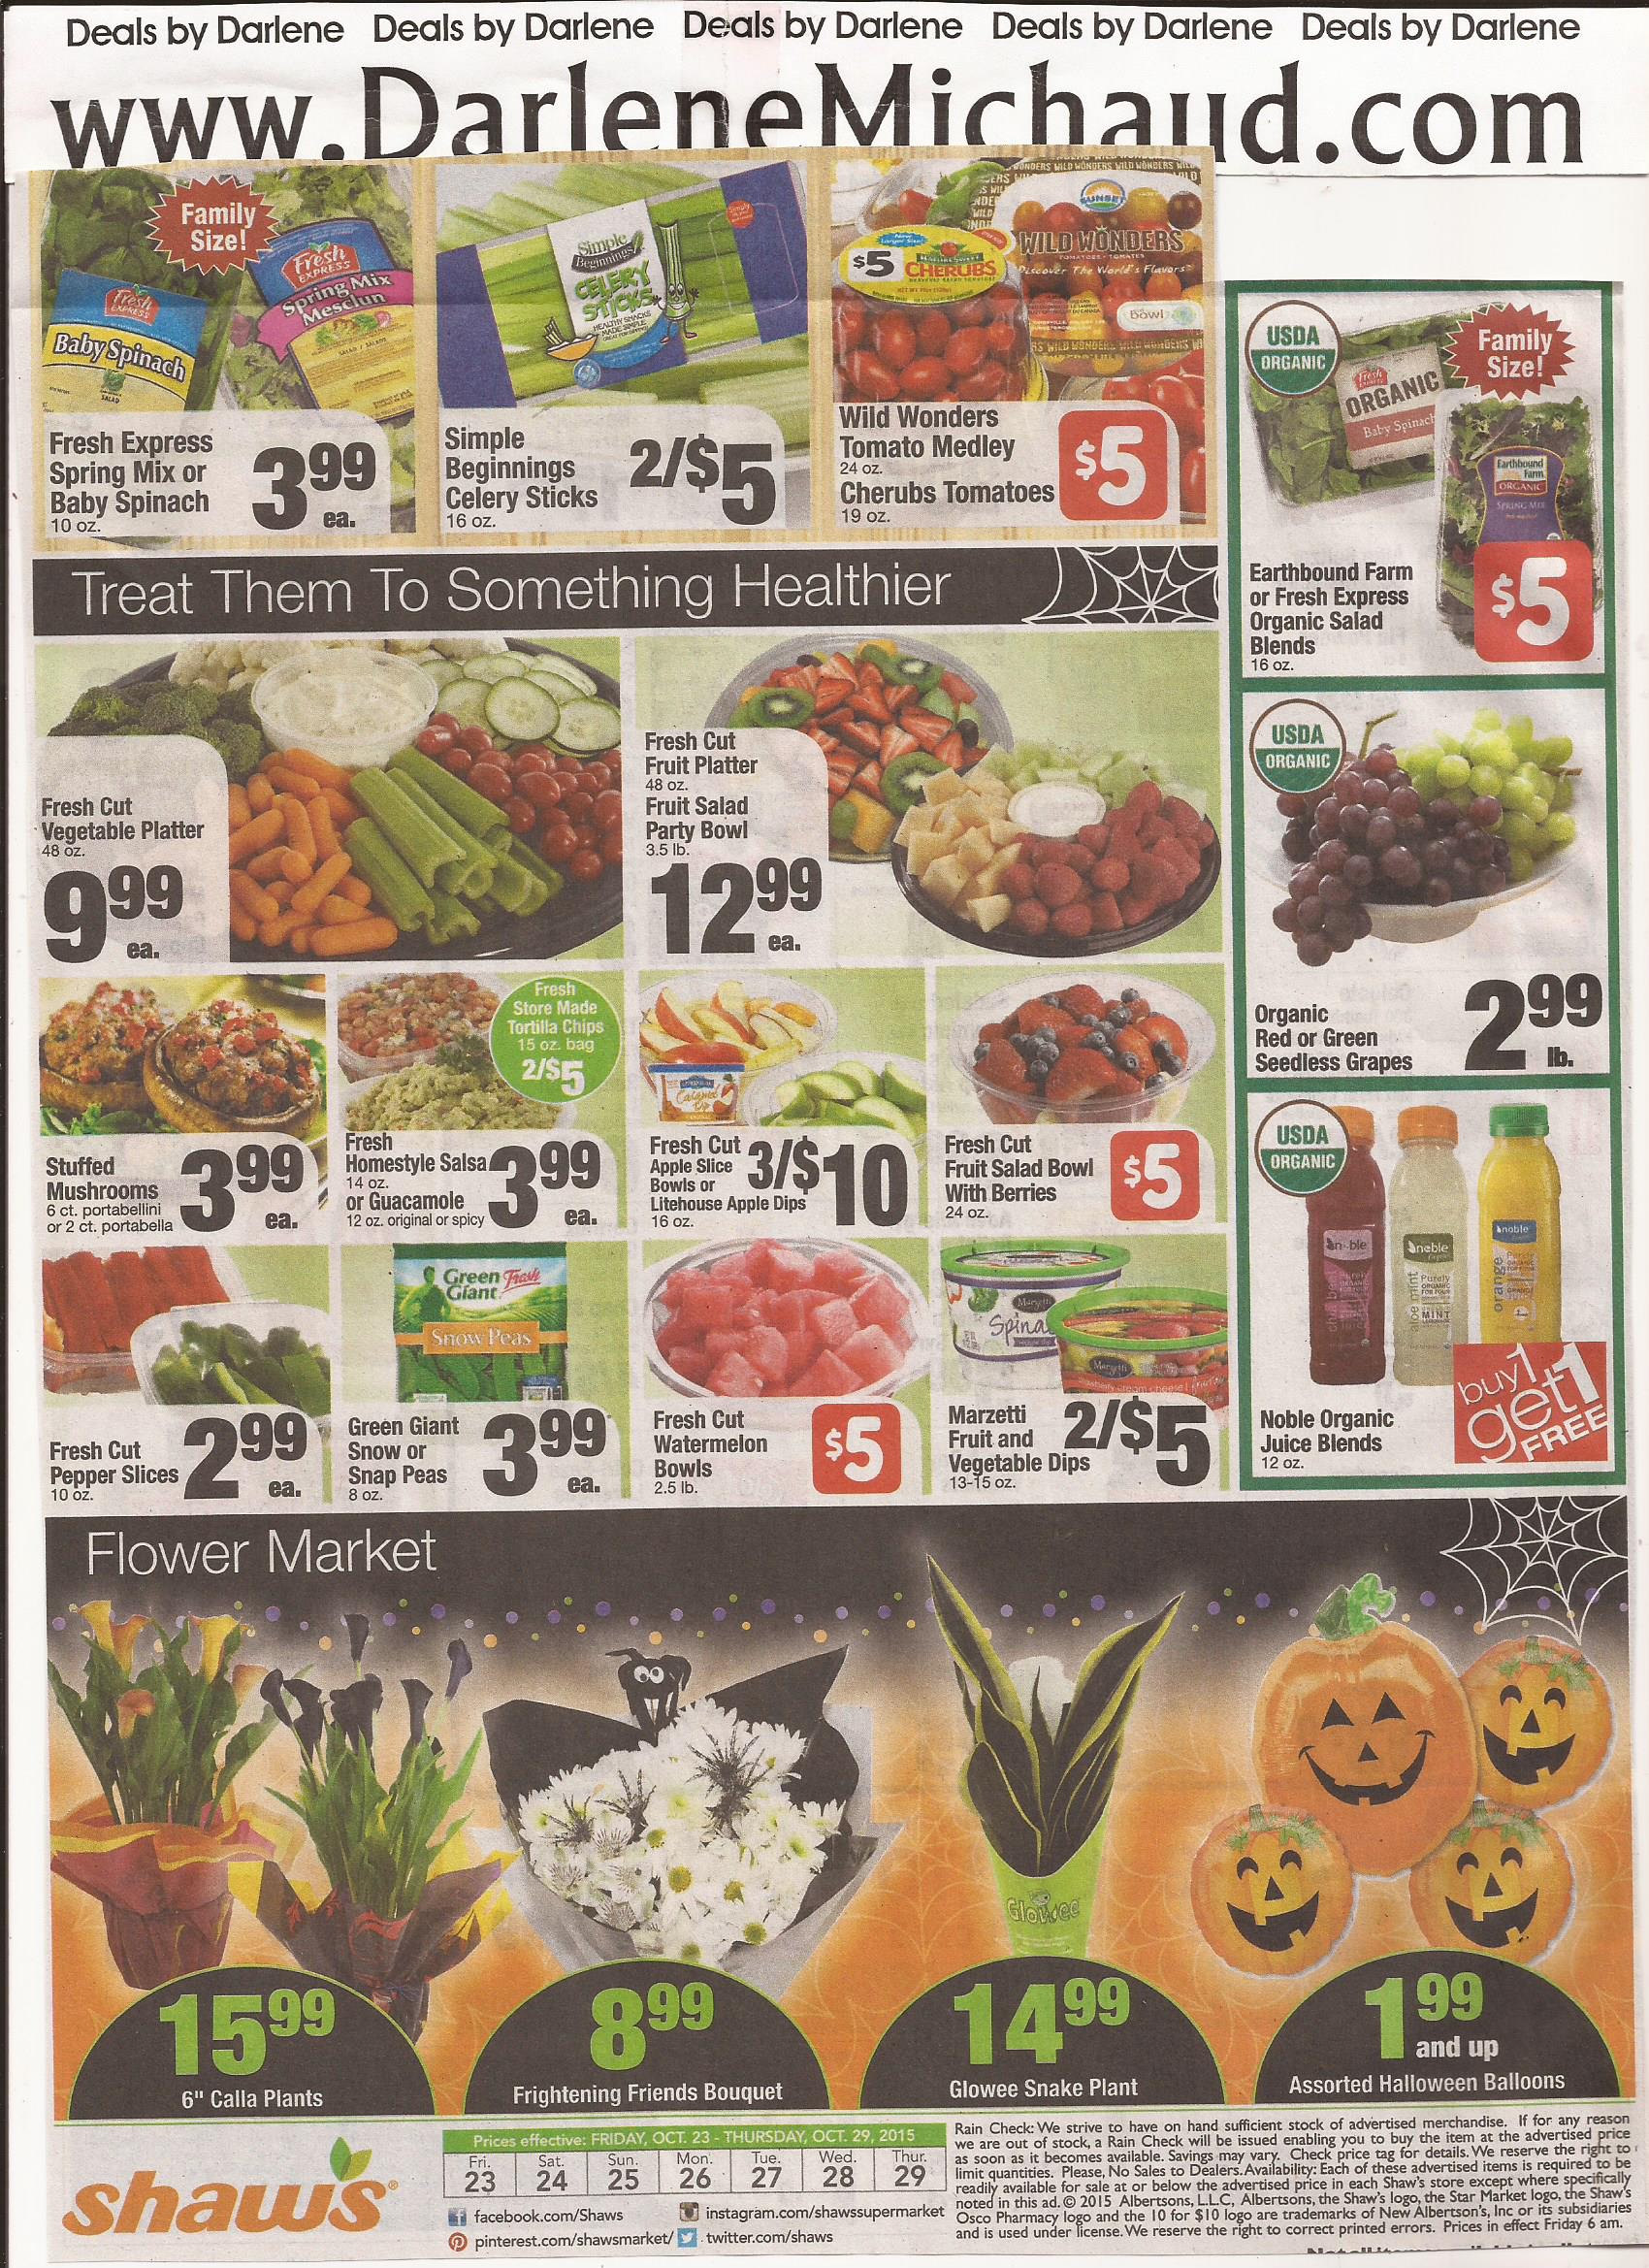 shaws-flyer-oct-23-oct-29-page-6b